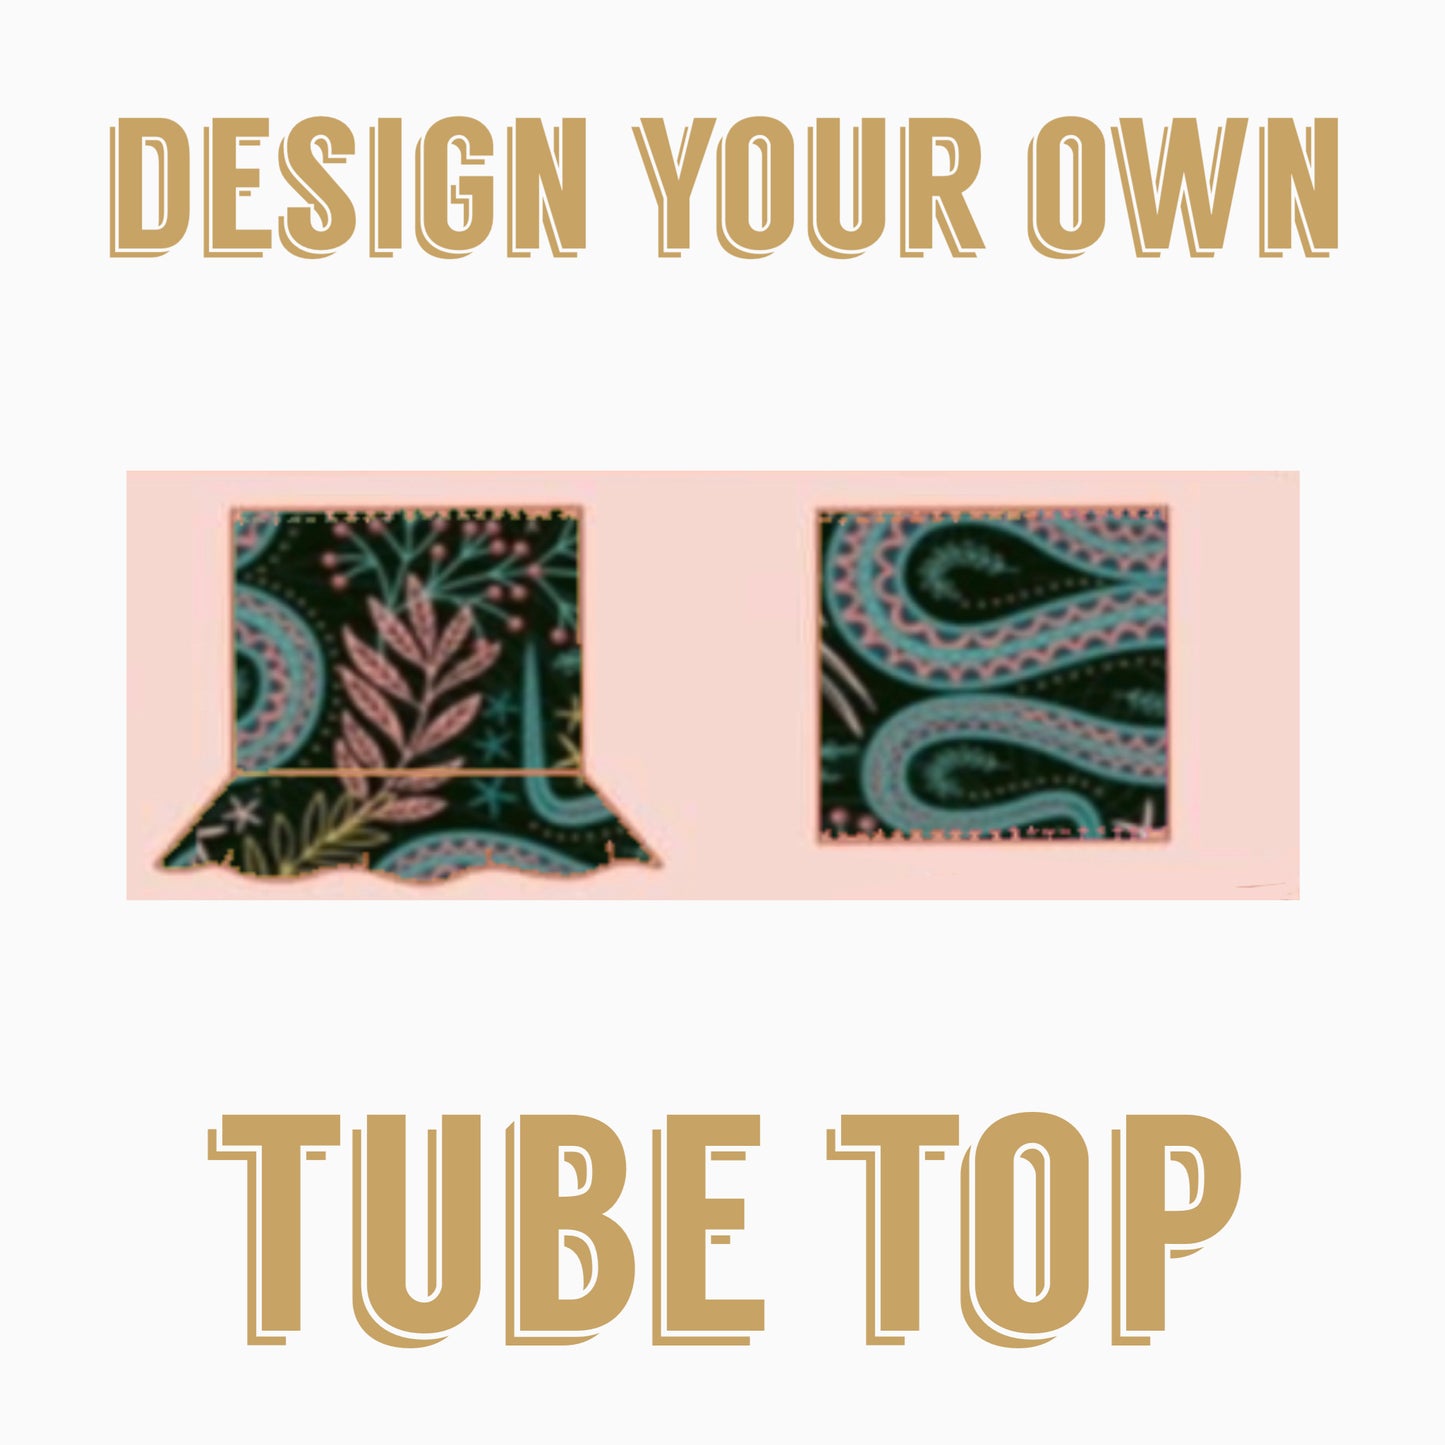 Design your own| Tube top